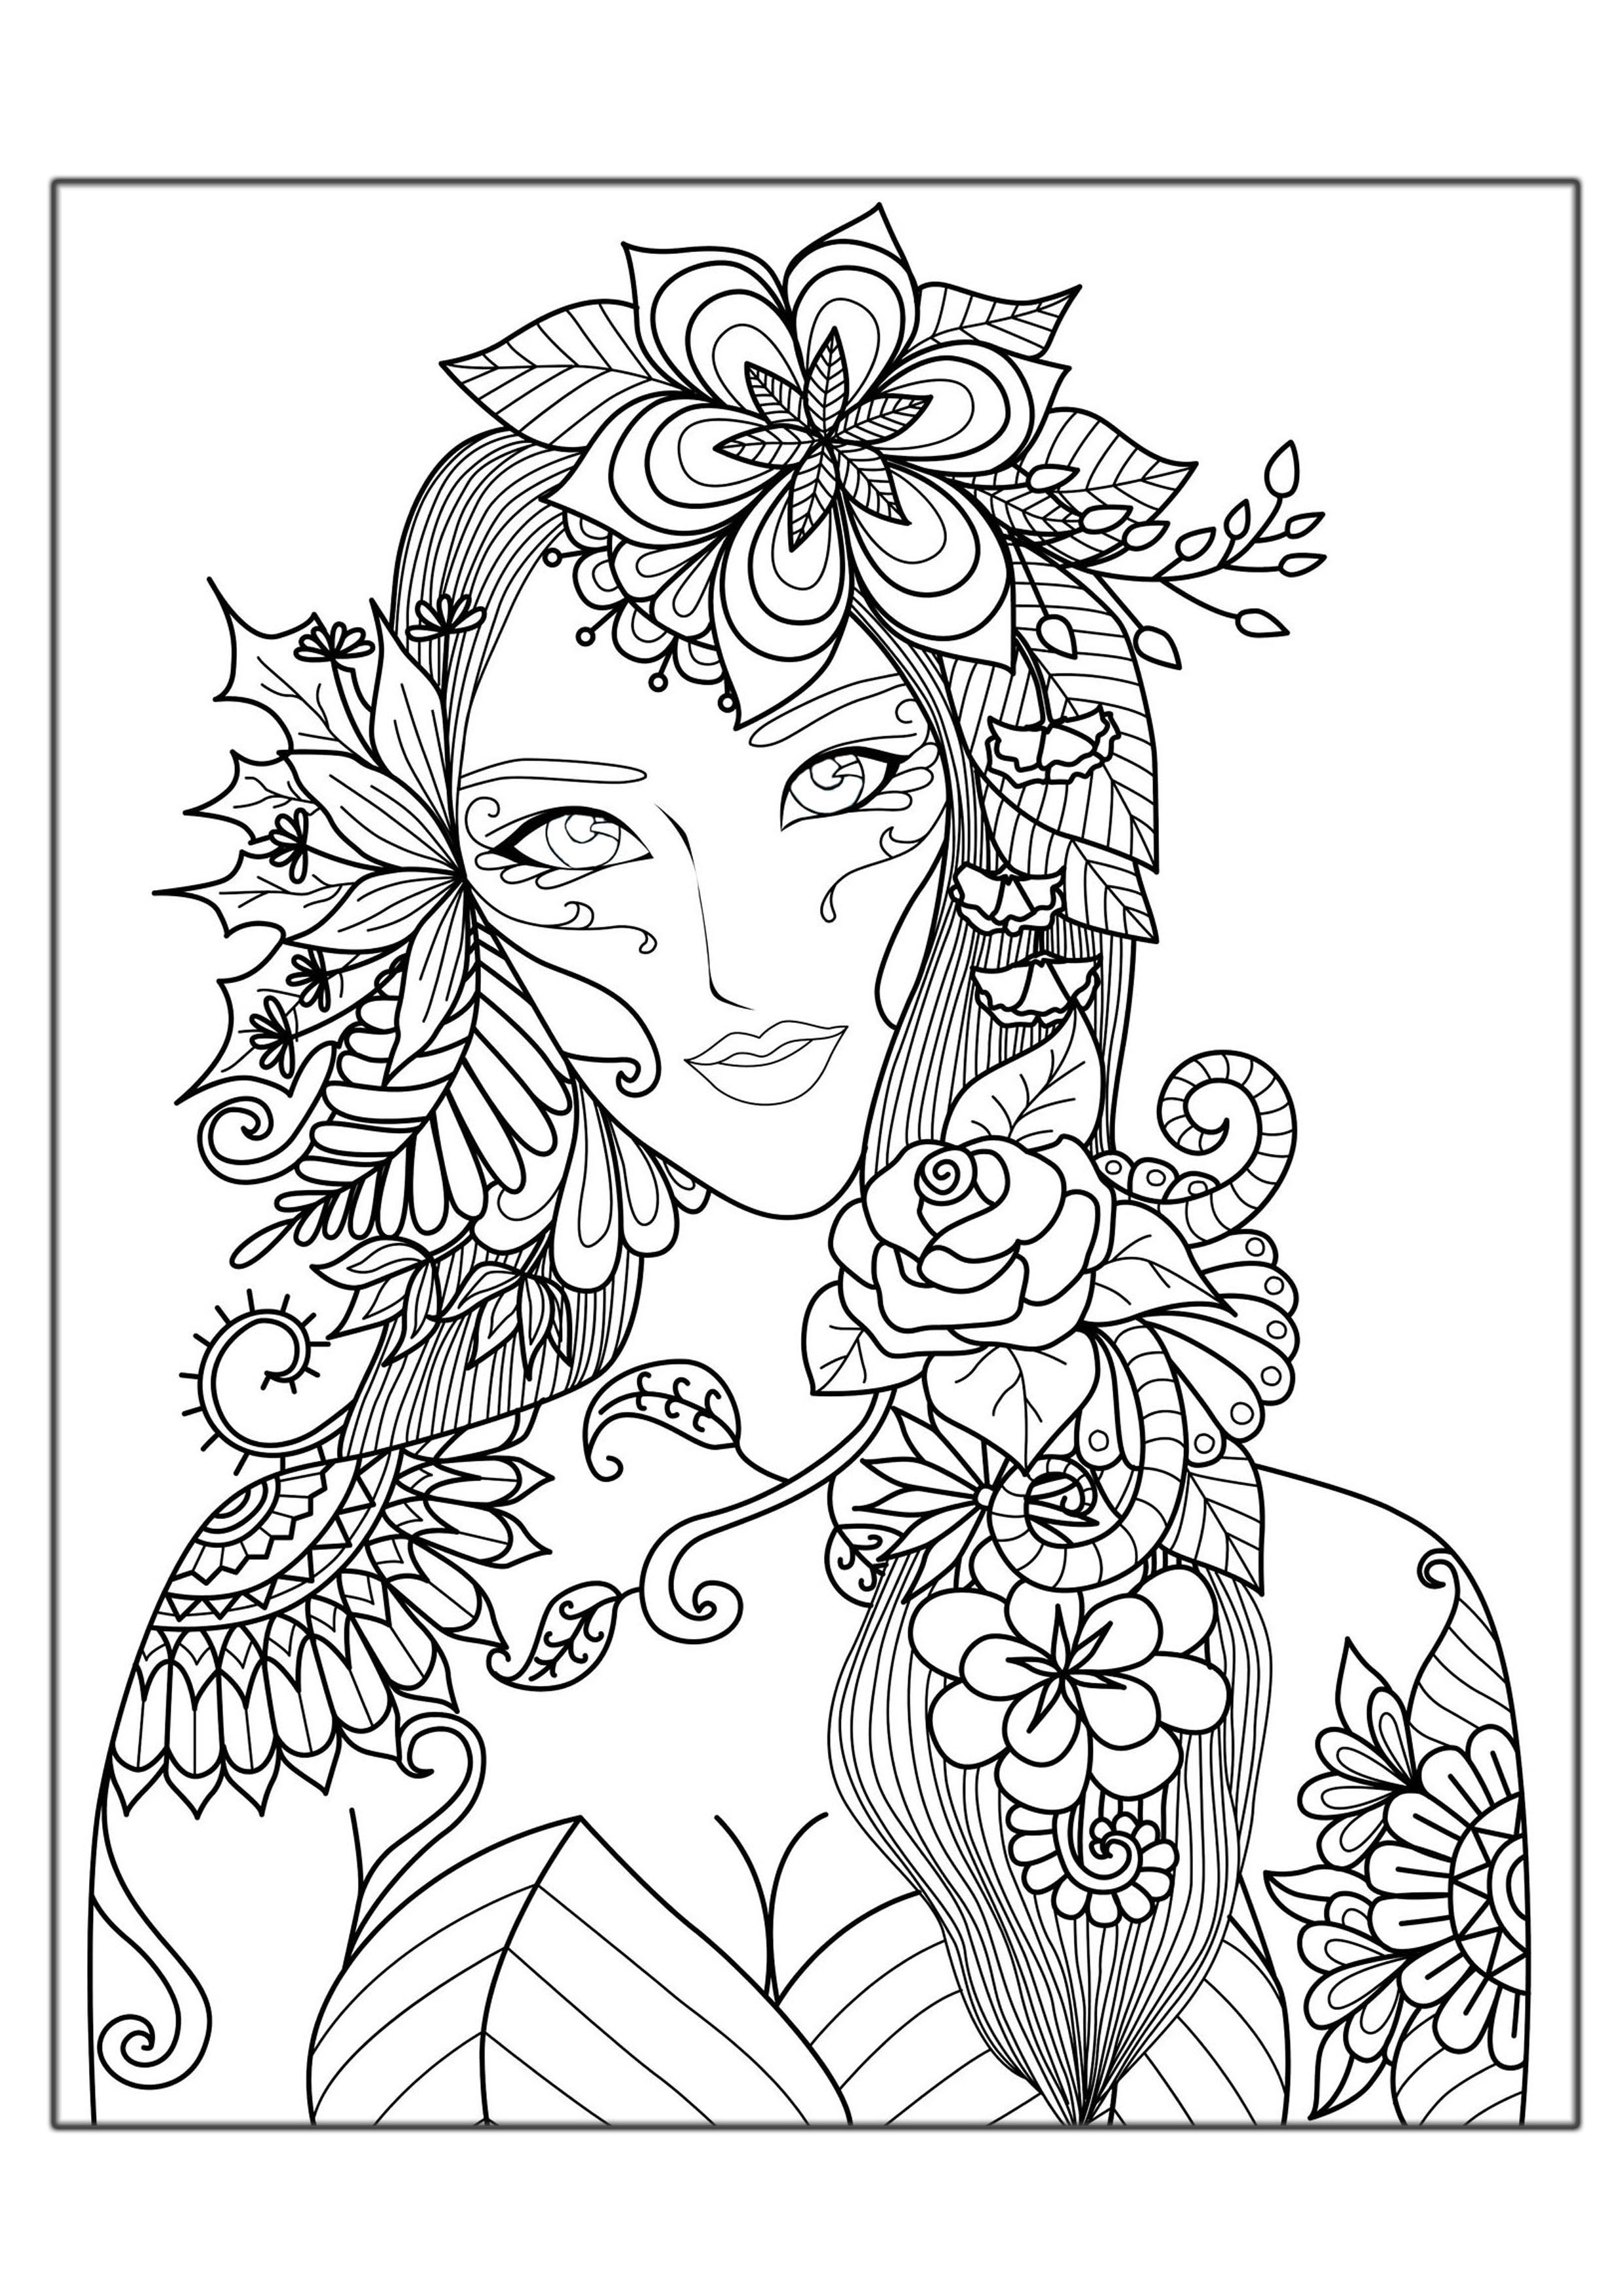 Coloring Pages Adults
 Hard Coloring Pages for Adults Best Coloring Pages For Kids